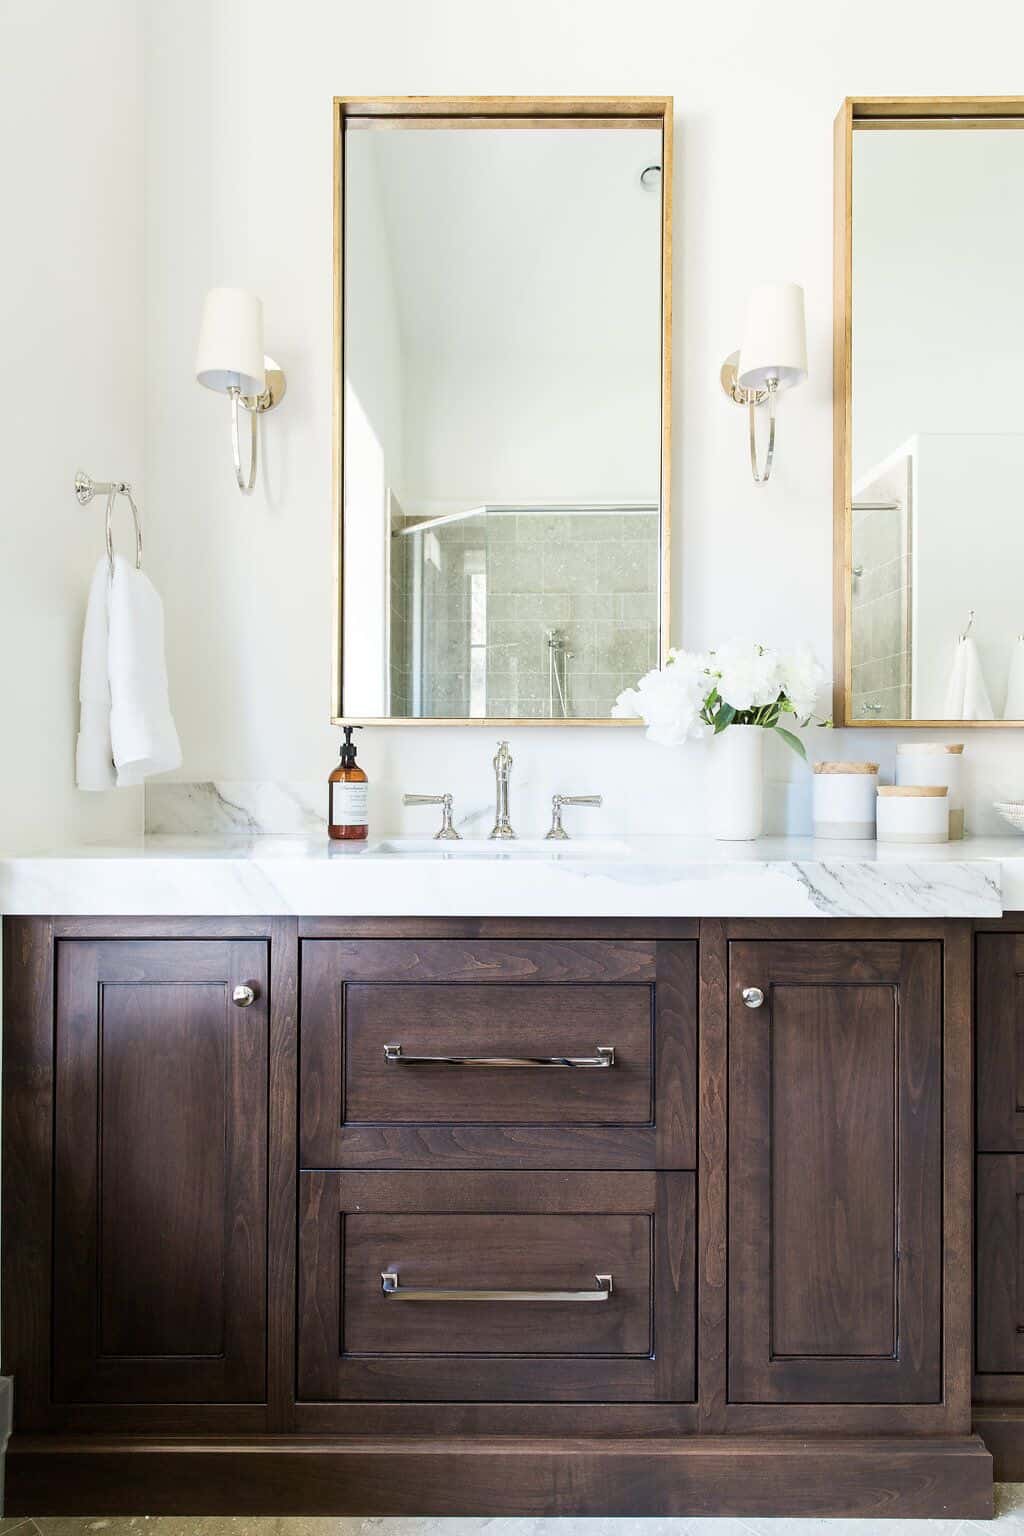 How to Decorate a Bathroom with a Brass Finish